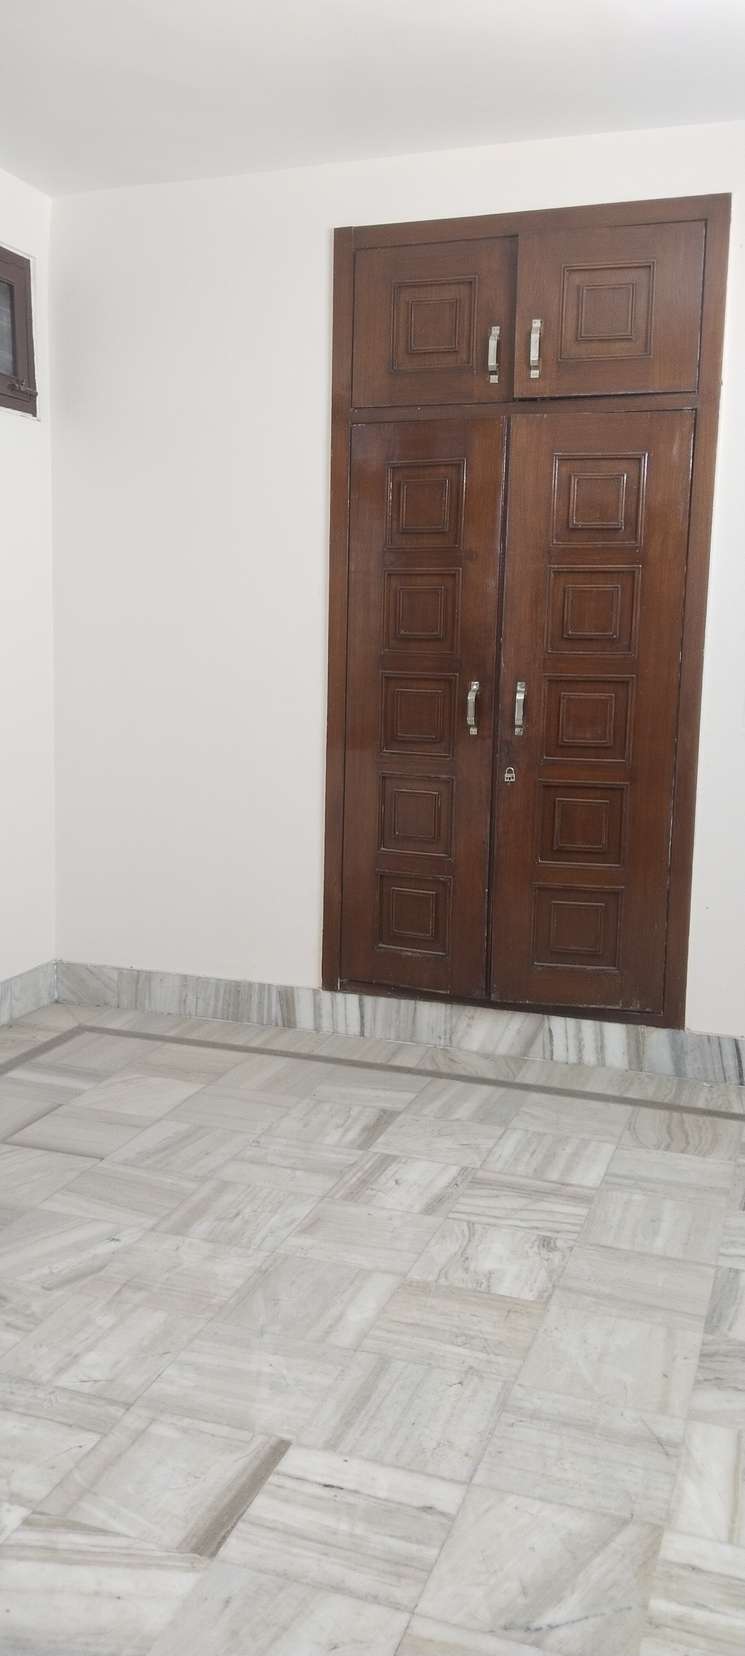 5 Bedroom 110 Sq.Yd. Independent House in H Block Shastri Nagar Ghaziabad